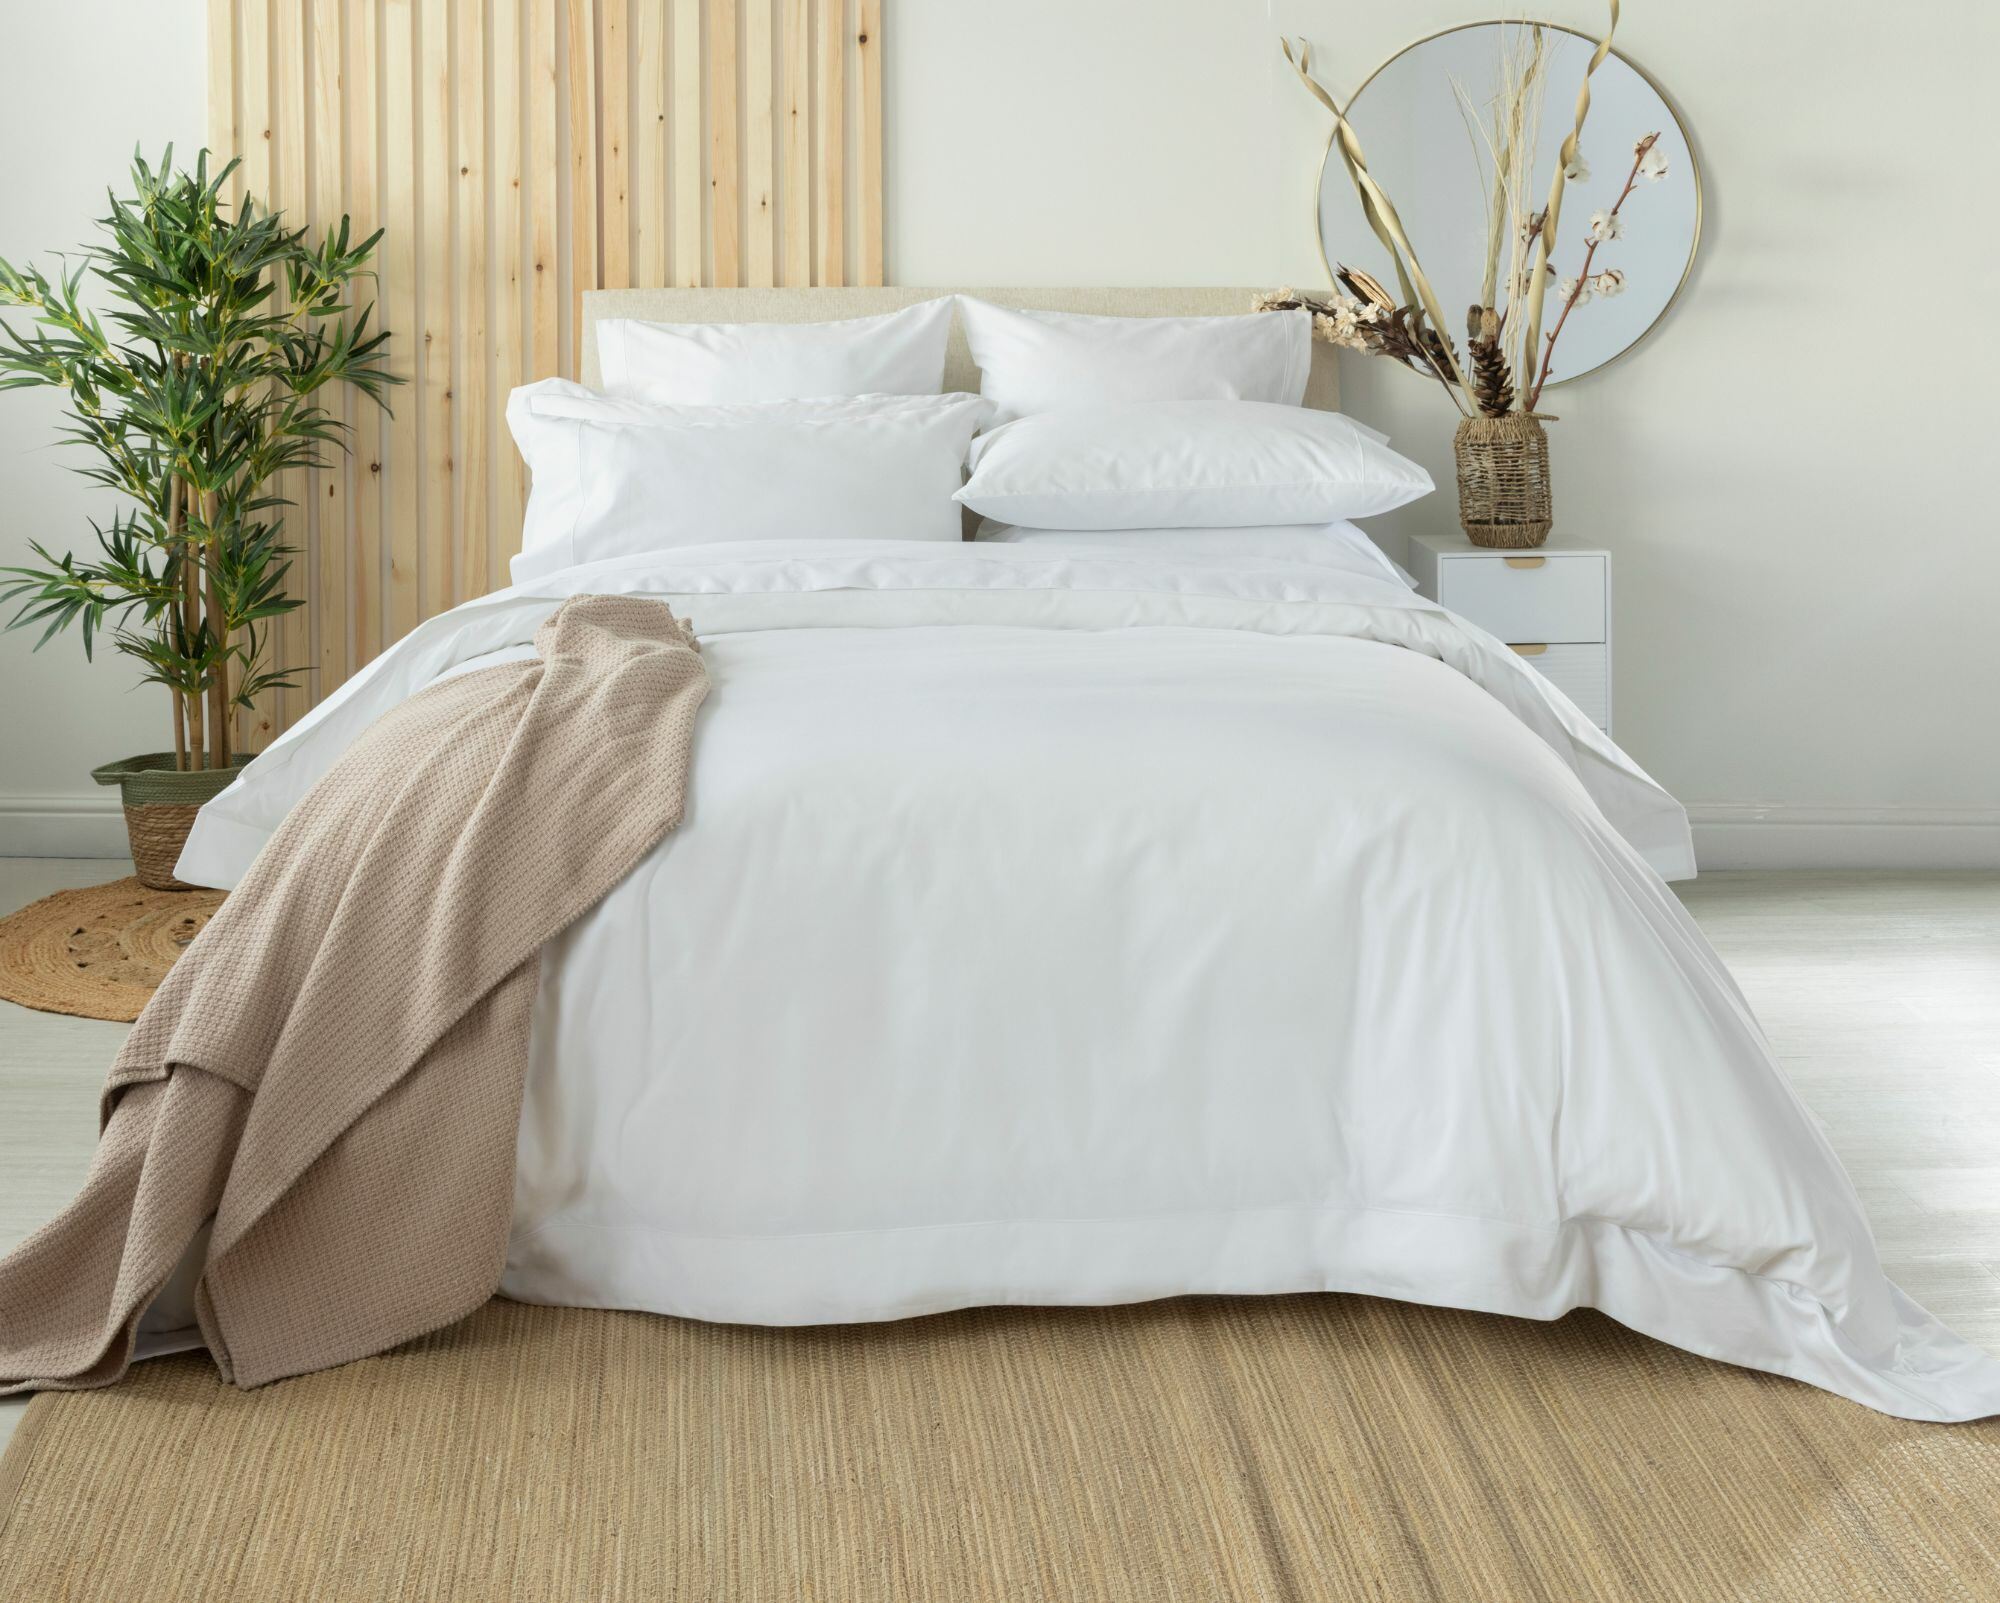 What are the benefits of Egyptian Cotton bed linen? | Belledorm